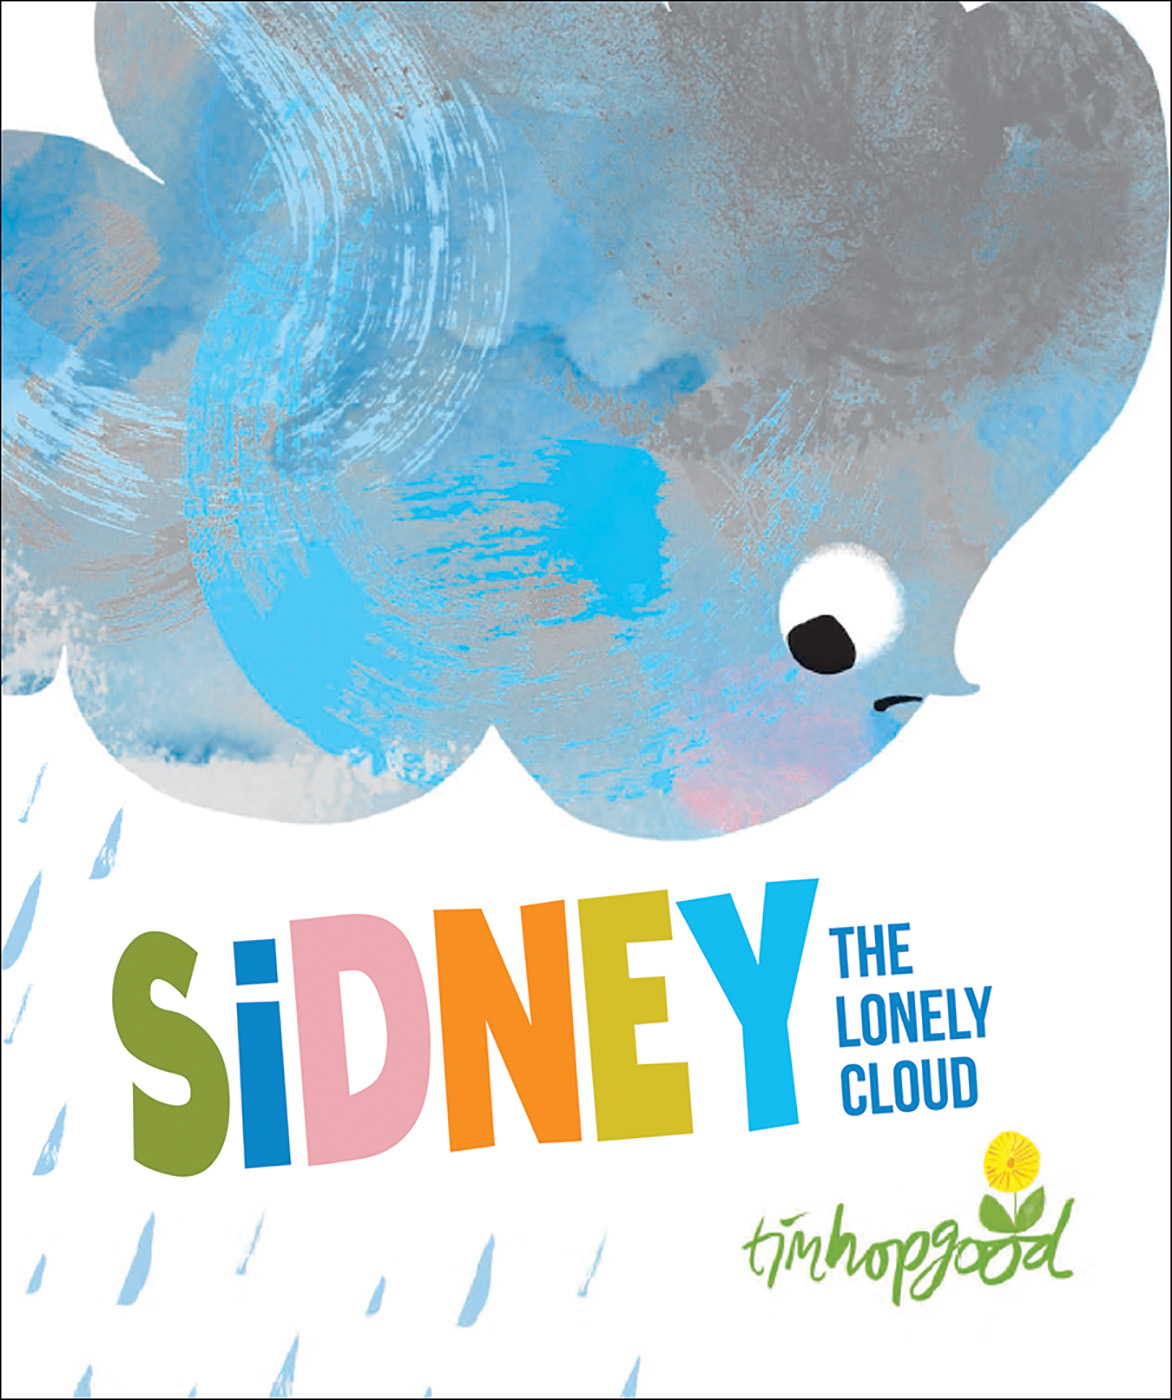 Sidney the Lonely Cloud